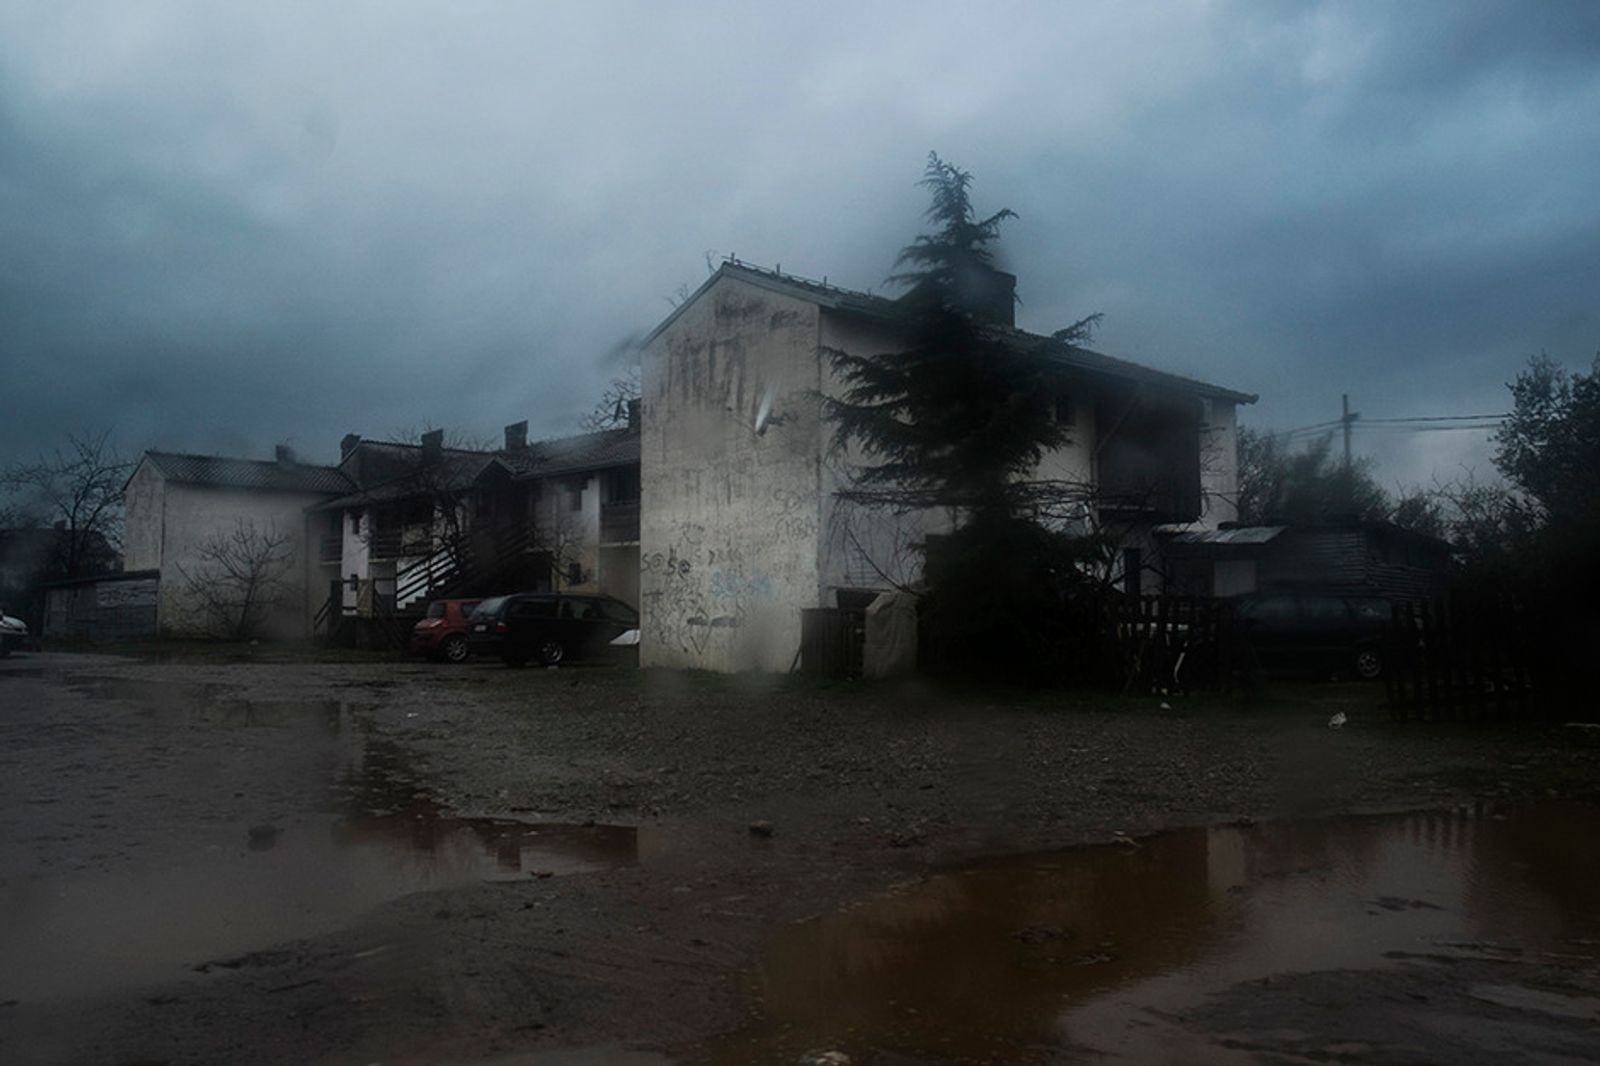 © Gianmarco Maraviglia - Camp Konic, Podgorica, Montenegro. Building where the people from Bosnia live since 1992.